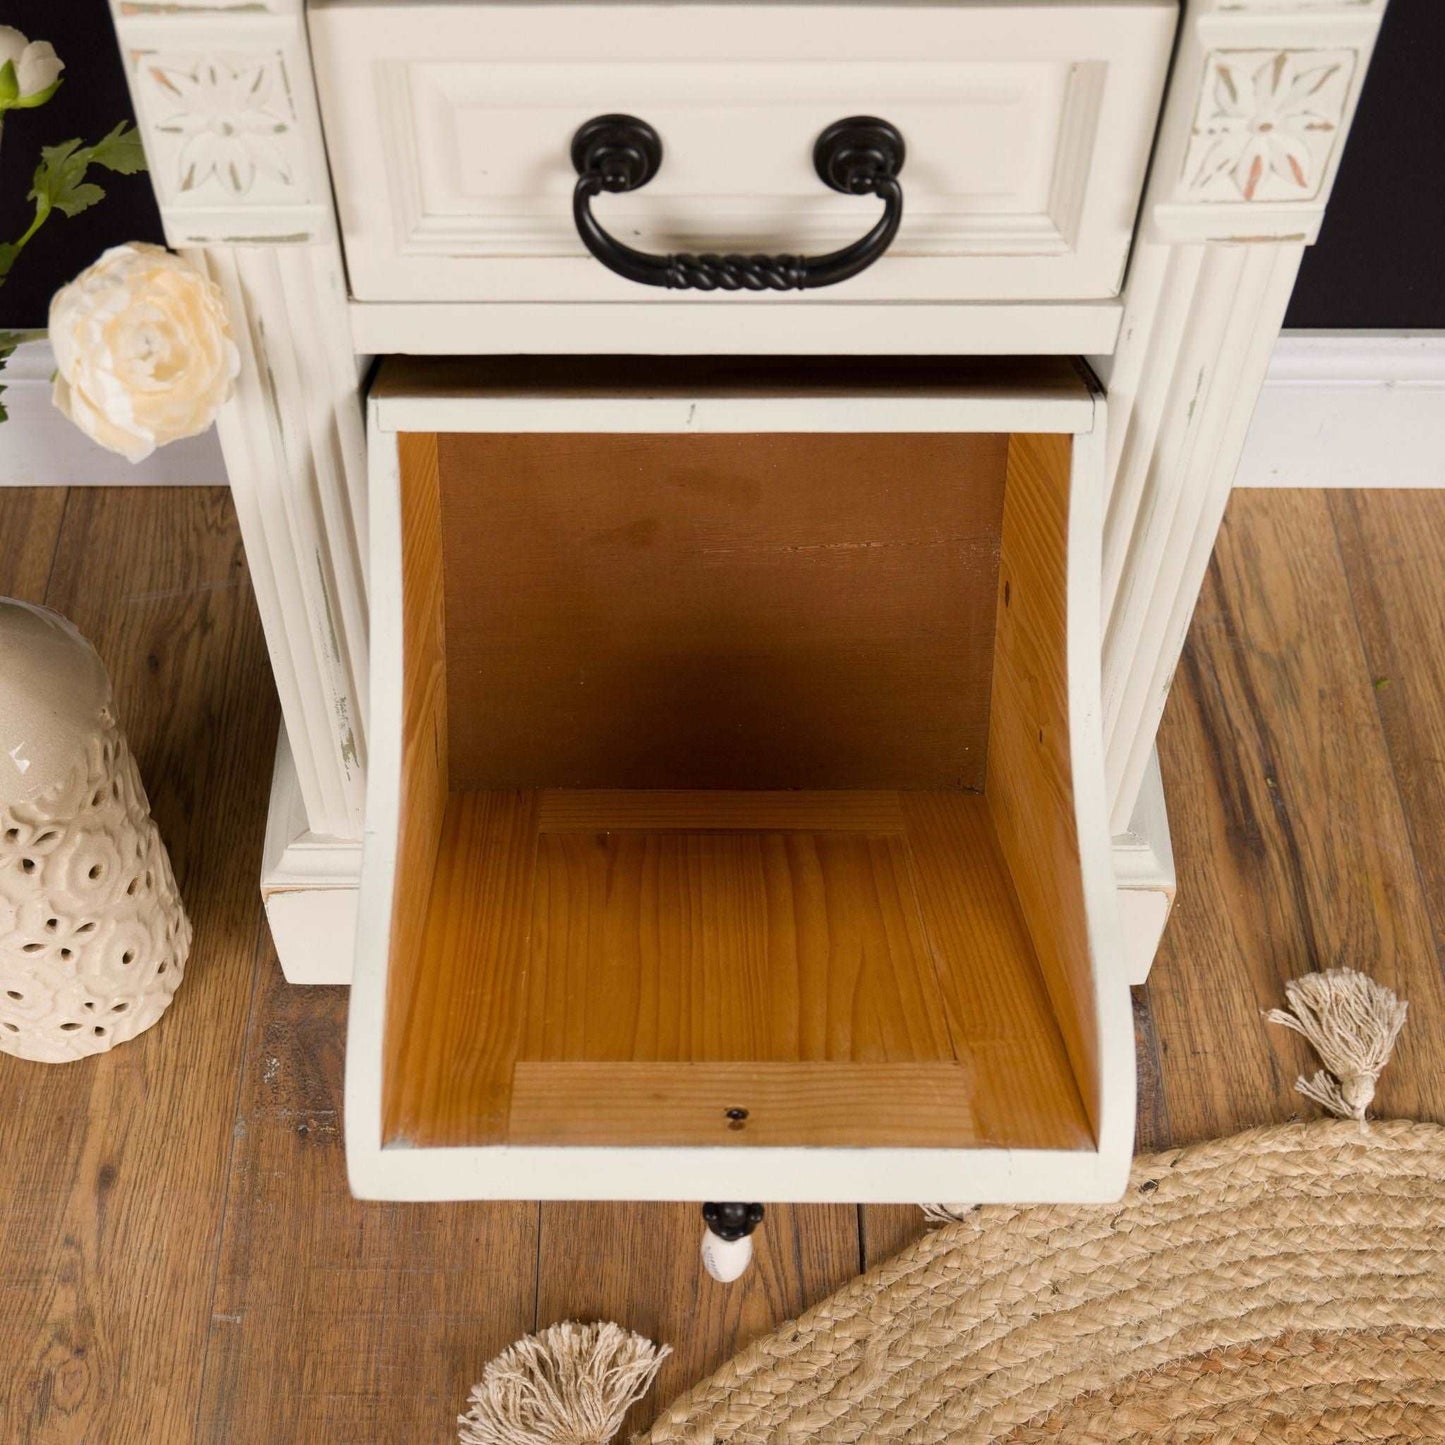 Solid Pine Bedside Table